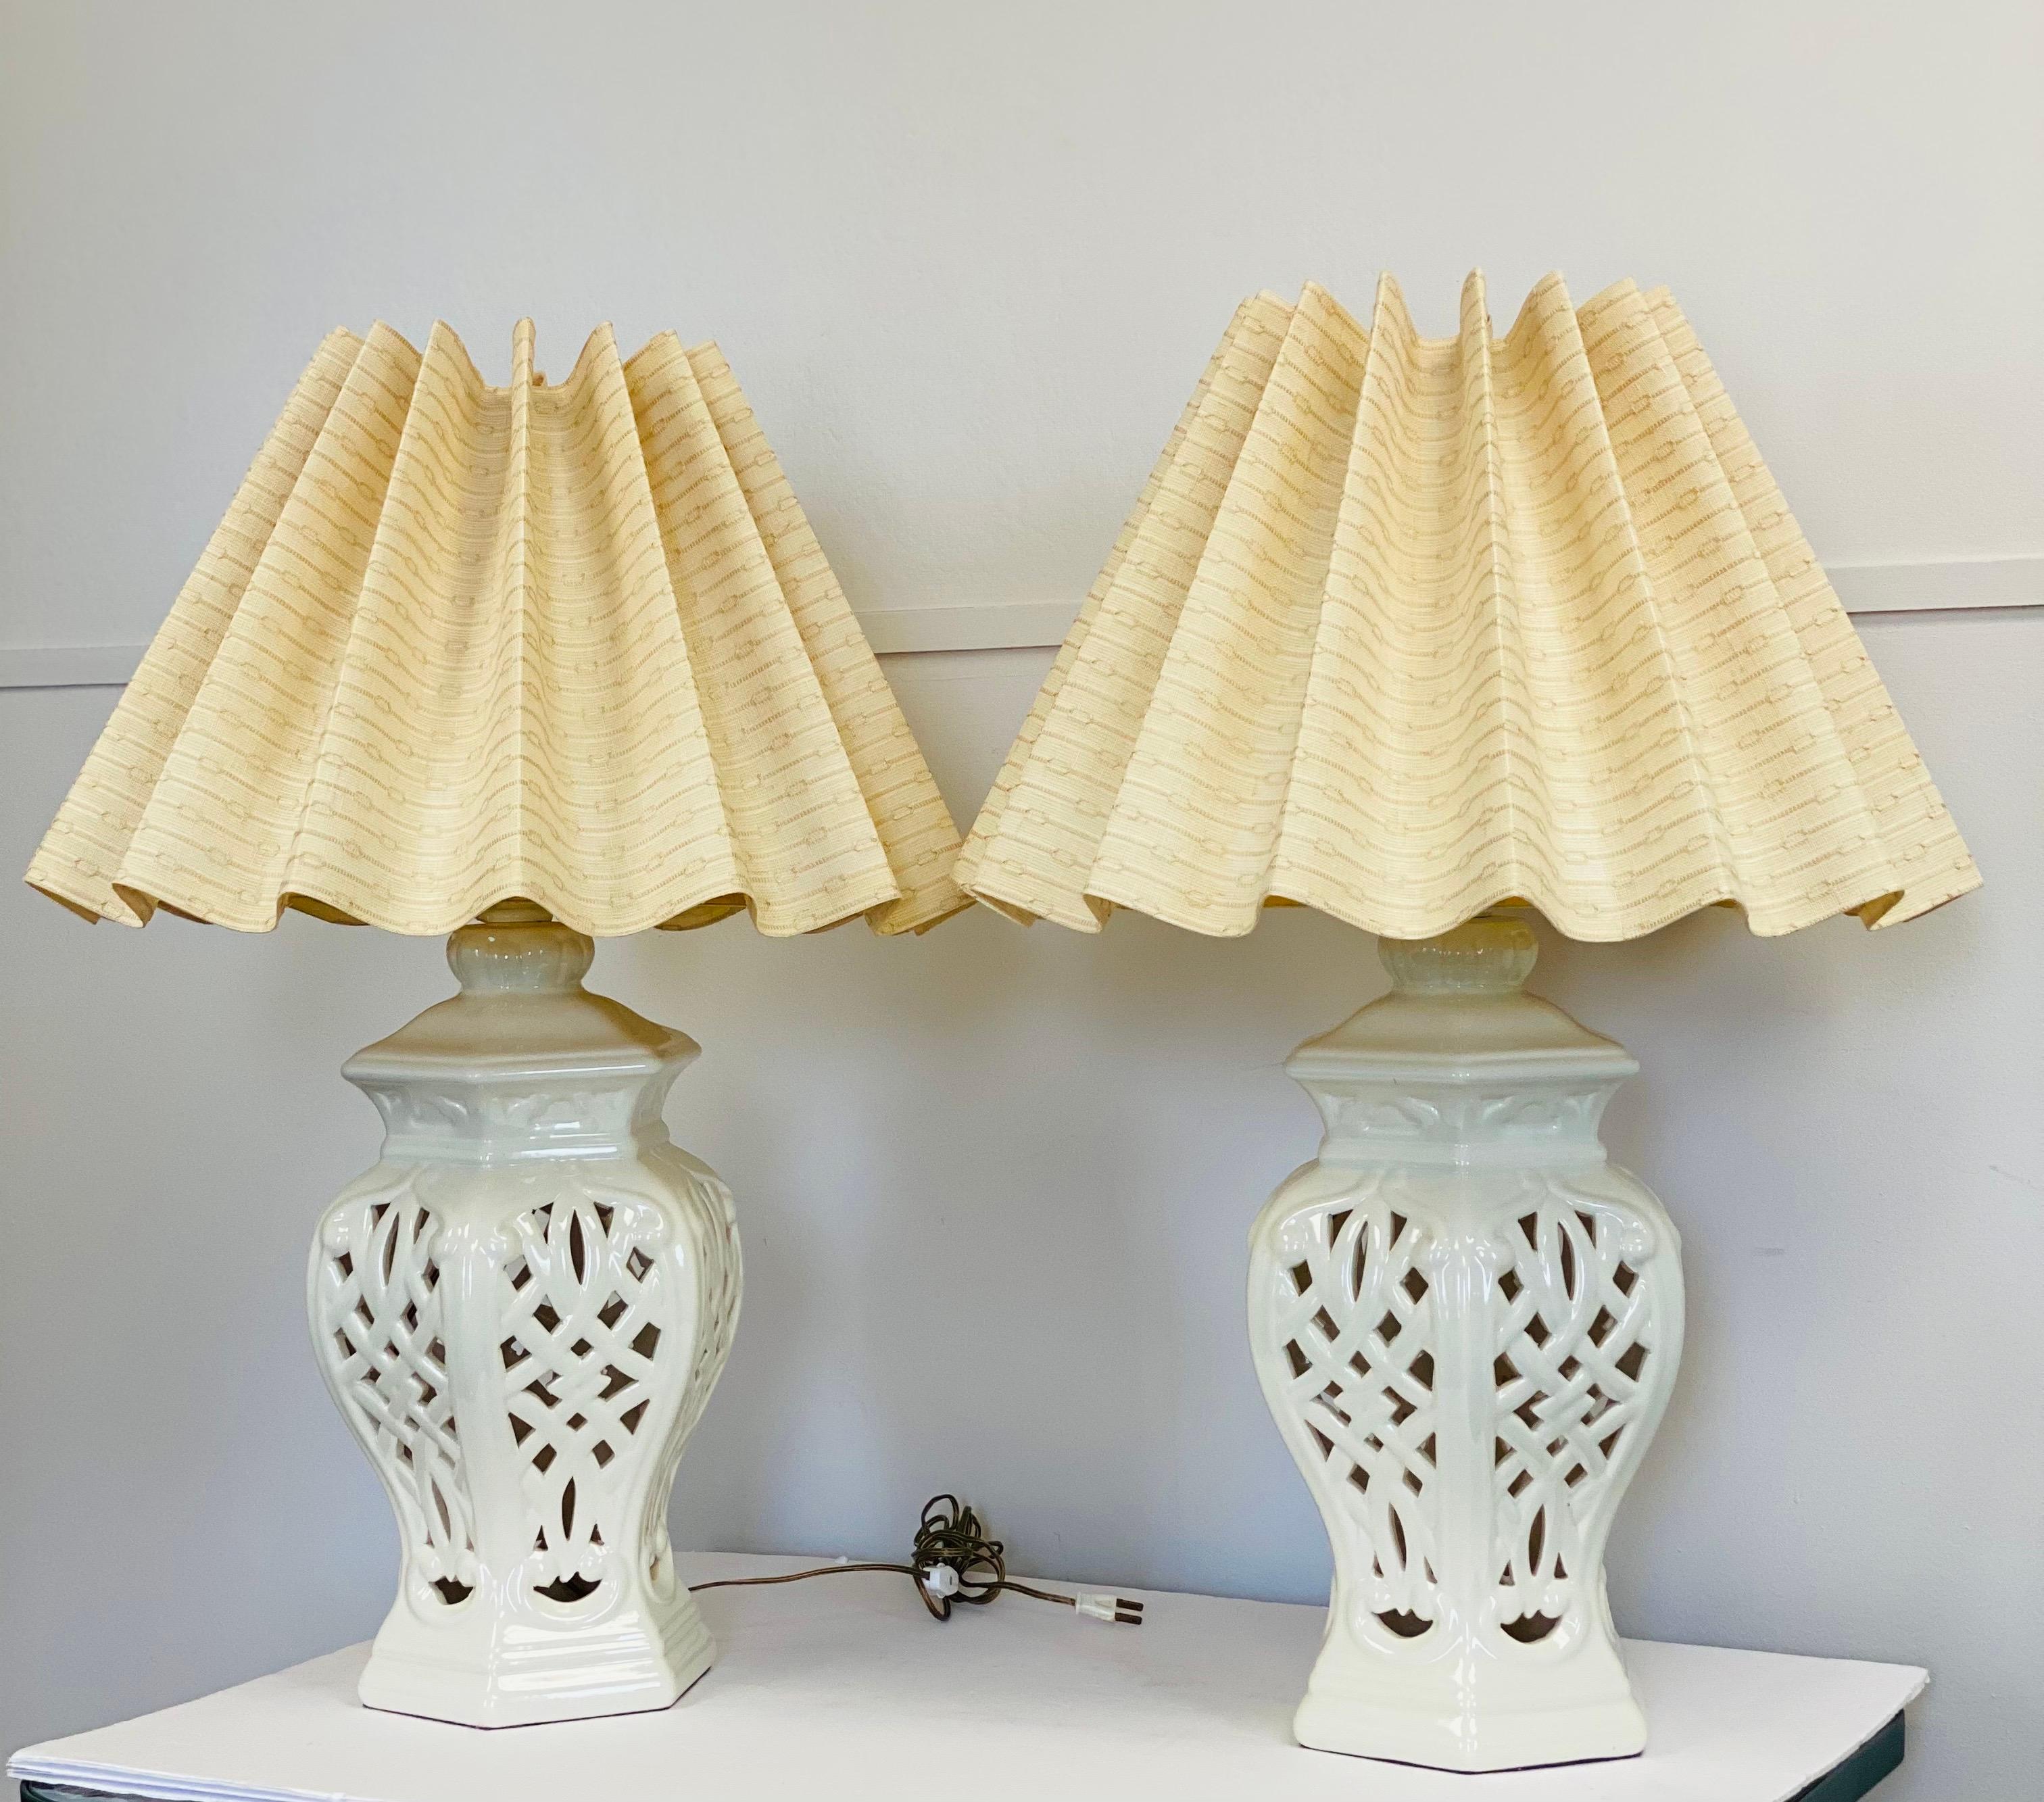 Hollywood Regency 1950s Reticulated White Glazed Ginger Jar Table Lamps with Shades, a Pair